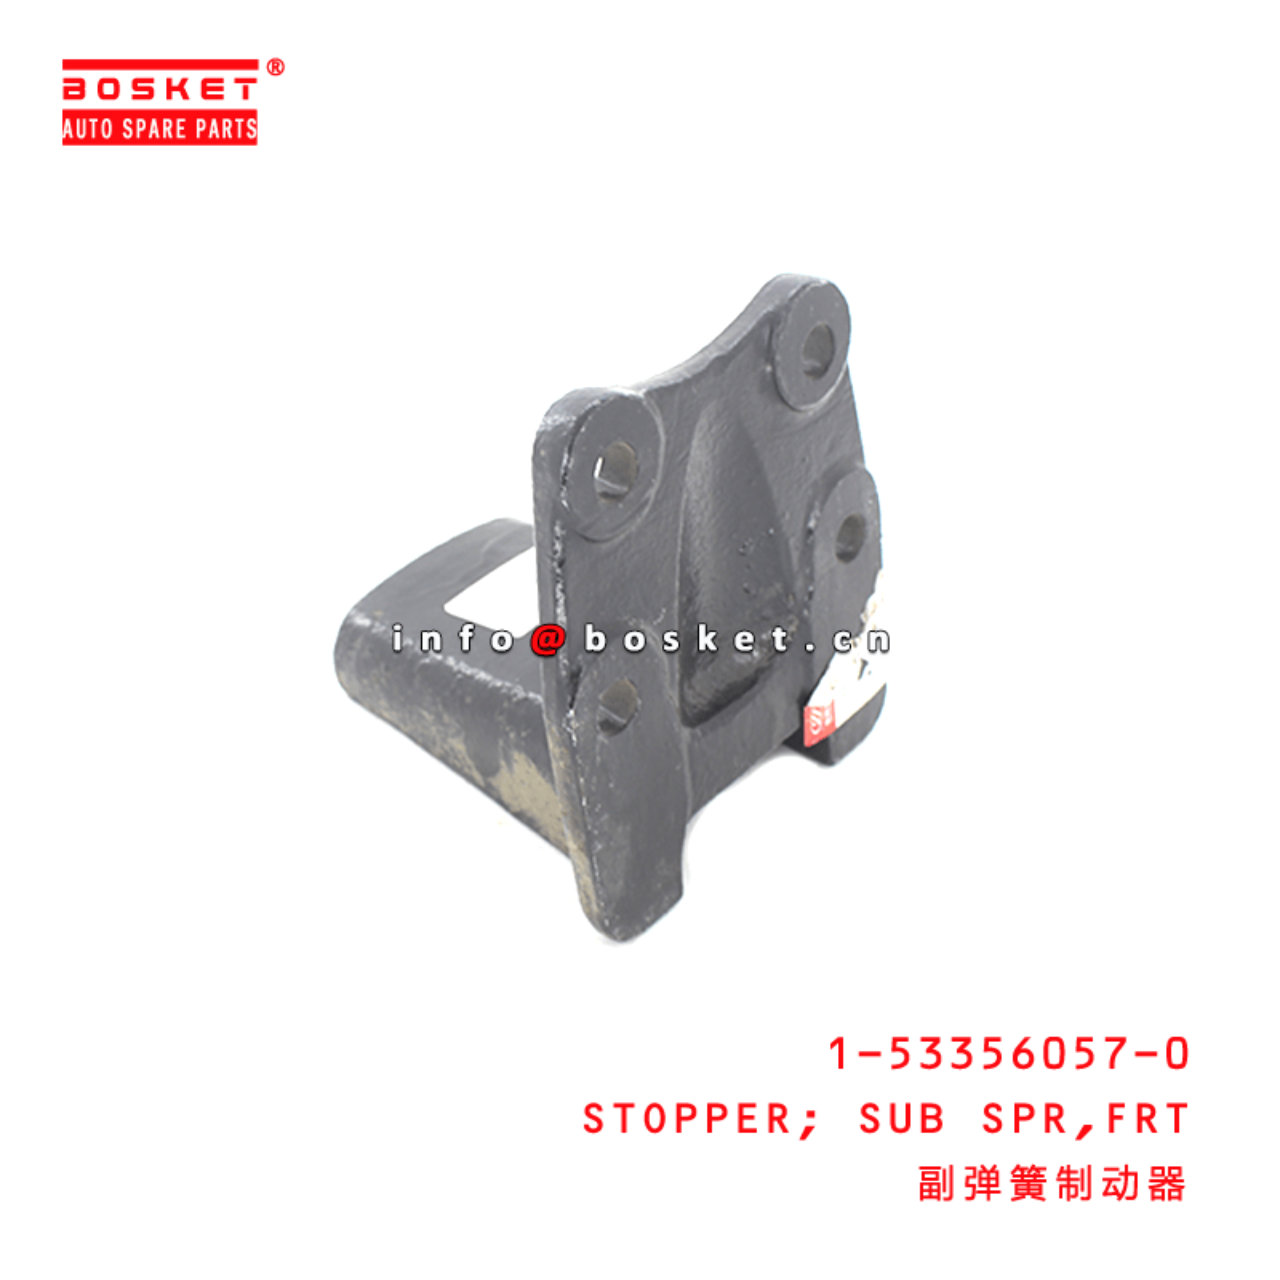  1-53356057-0 Front Subsidiary Spring Stopper 1533560570 Suitable for ISUZU FVR 